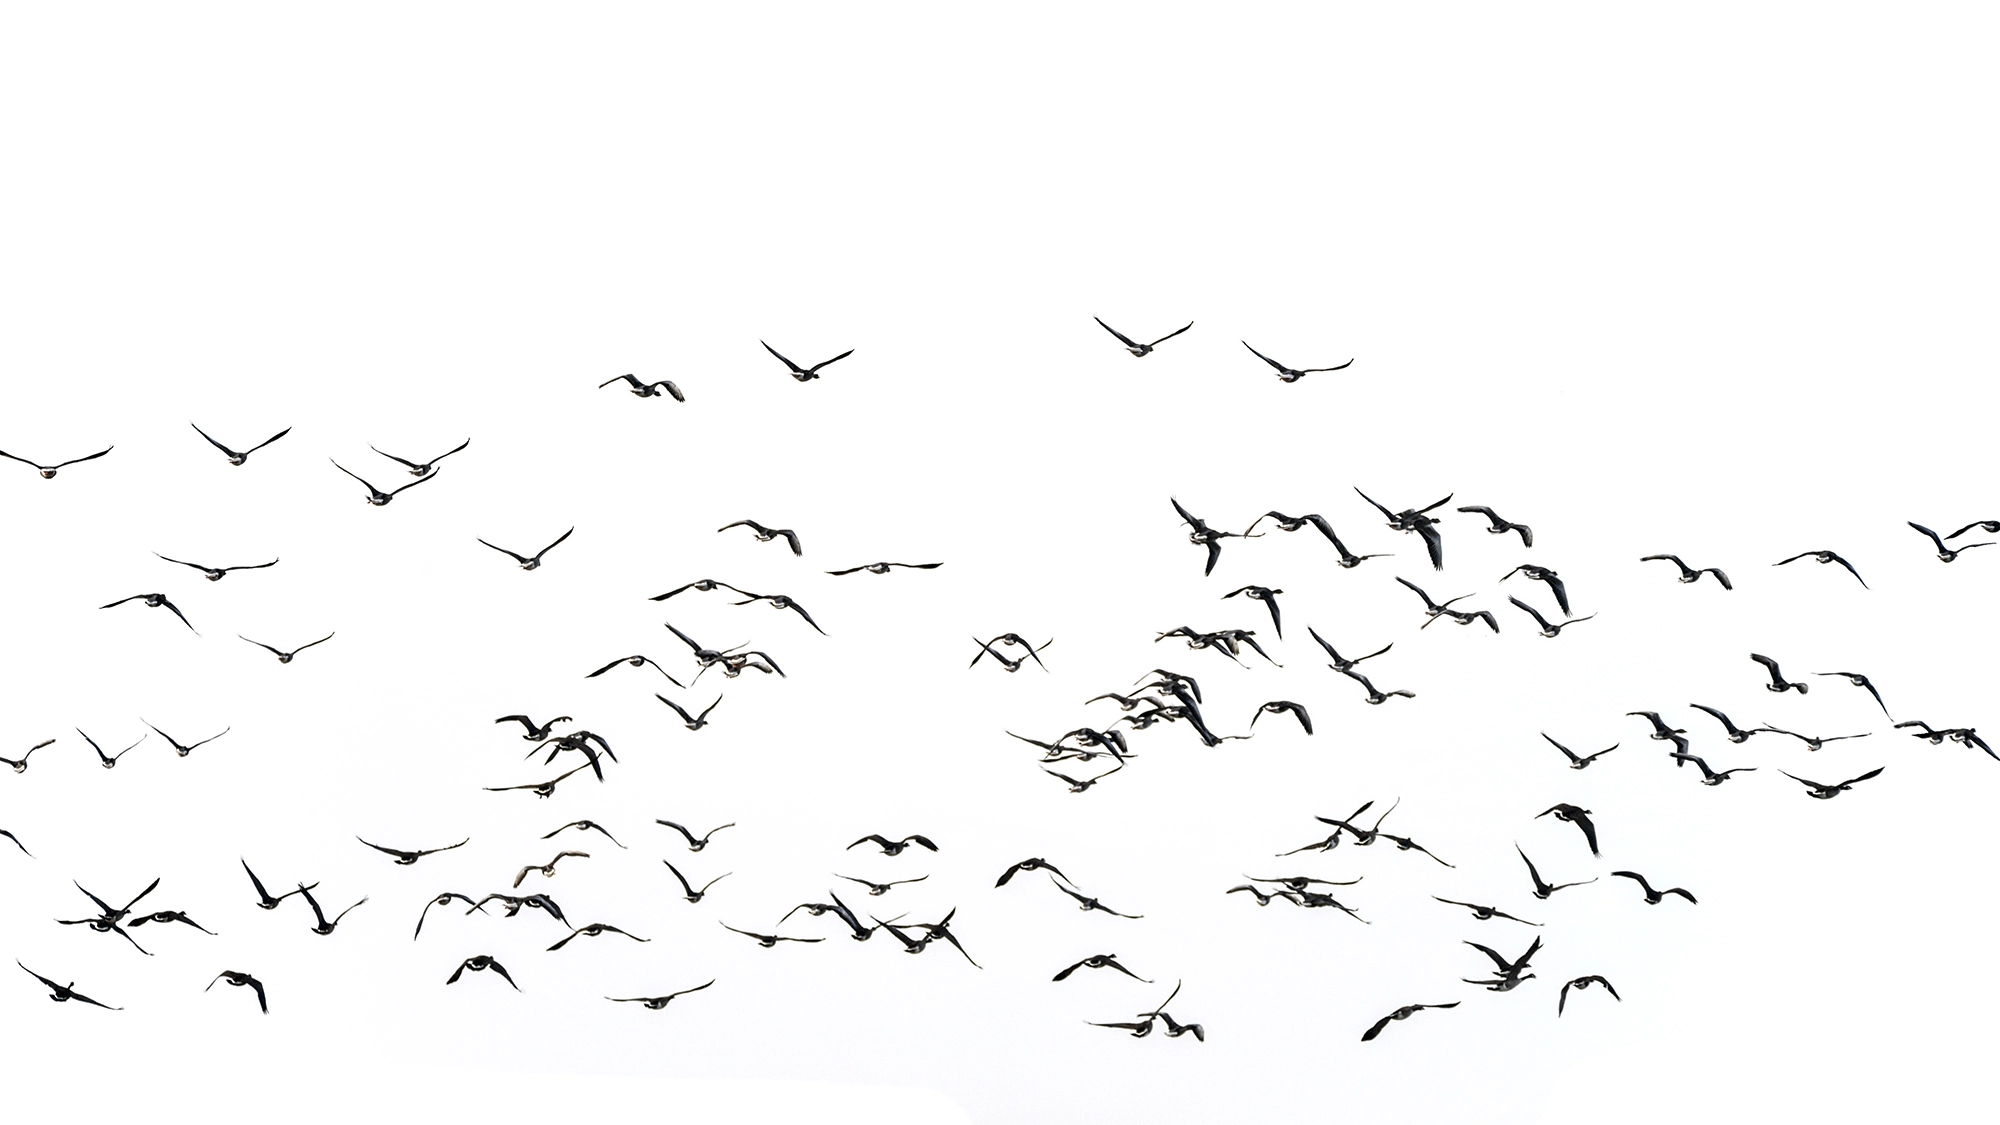 Nikon D800 sample photo. Flock of beautiful migratory lapwing birds in clear winter sky i photography